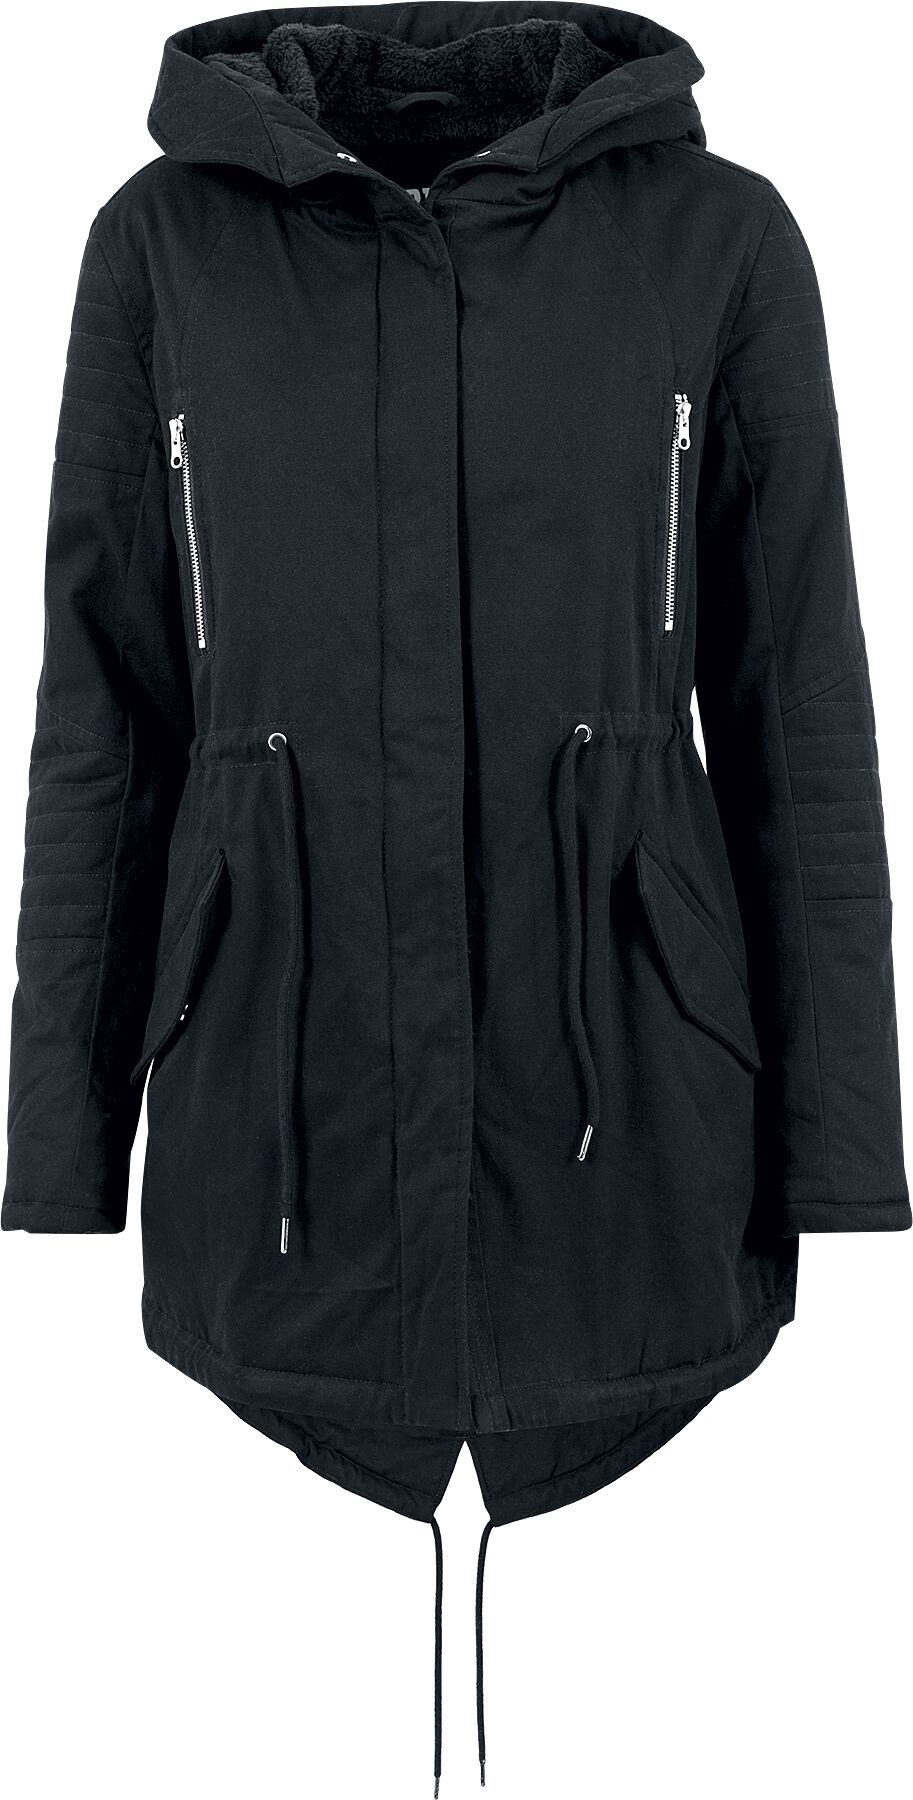 Image of Giacca invernale di Urban Classics - Ladies Sherpa Lined Cotton Parka - XS a 5XL - Donna - nero